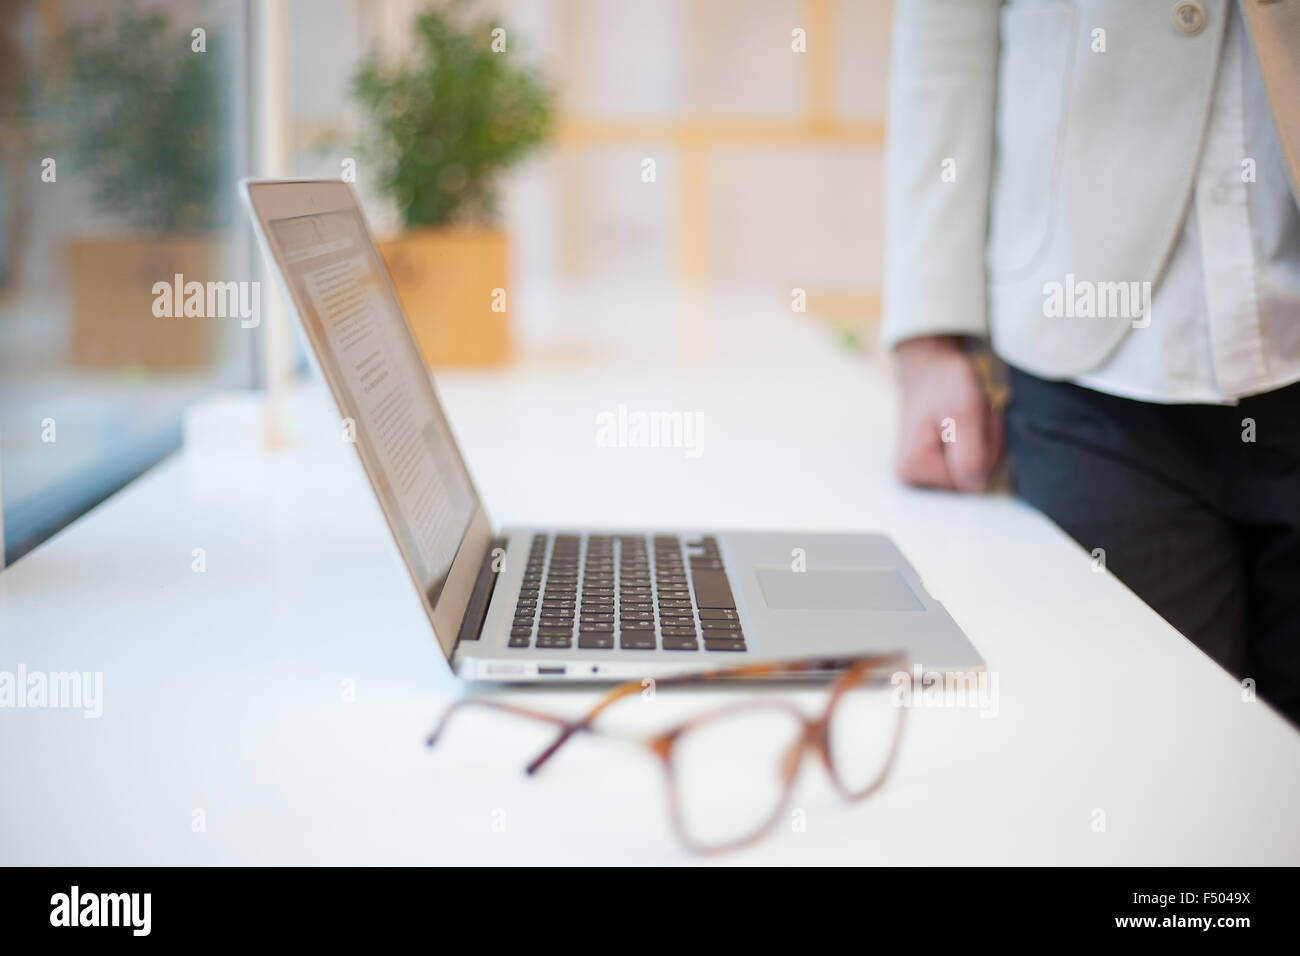 Modern workplace. Laptop in office Stock Photo